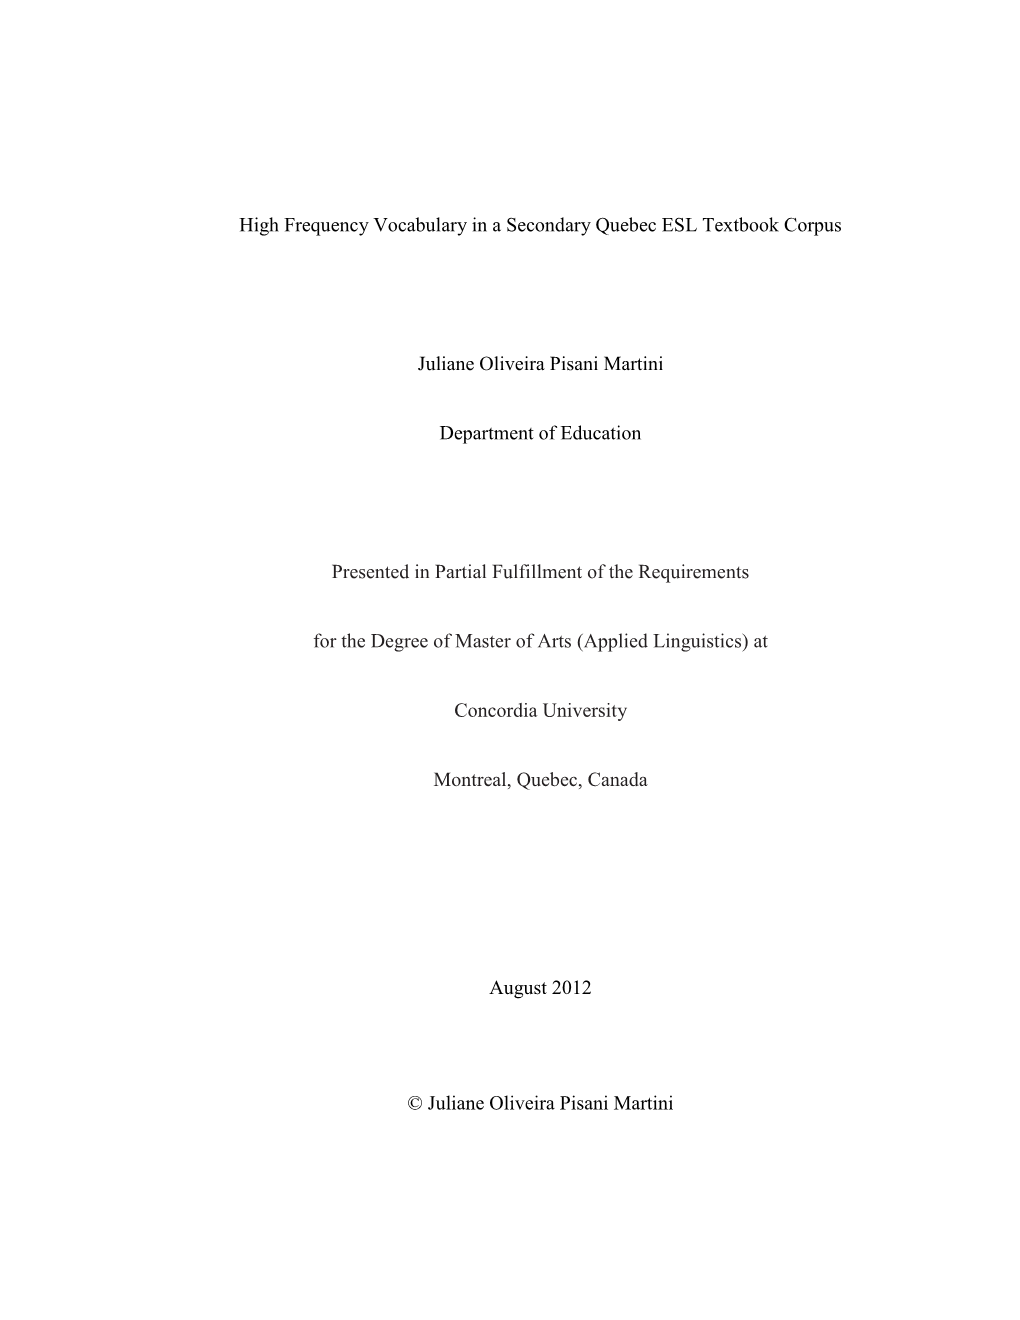 Thesis Document (PDF/A